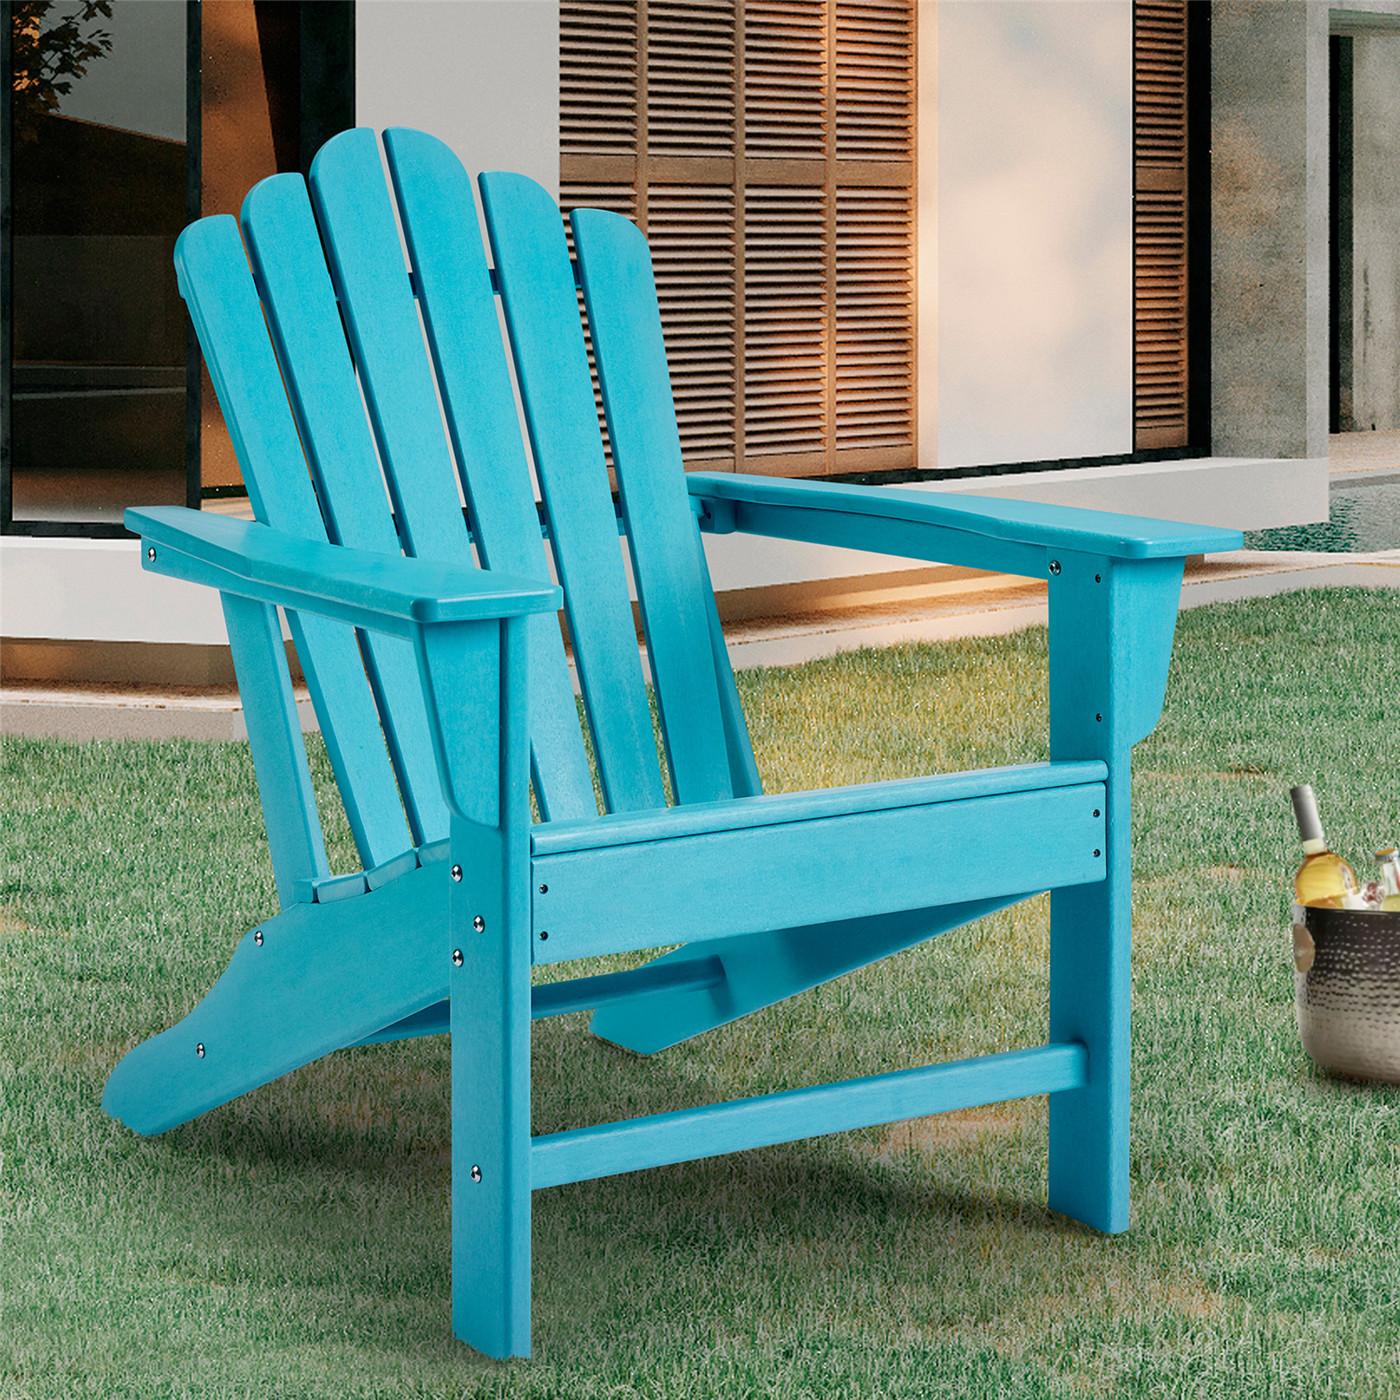 Adirondack Chair Patio Chairs Lawn Chair Outdoor Chairs Painted Chair Weather Resistant for Patio Deck Garden, Backyard Deck, Fire Pit & Lawn Furniture Porch and Lawn Seating- Blue - image 1 of 7